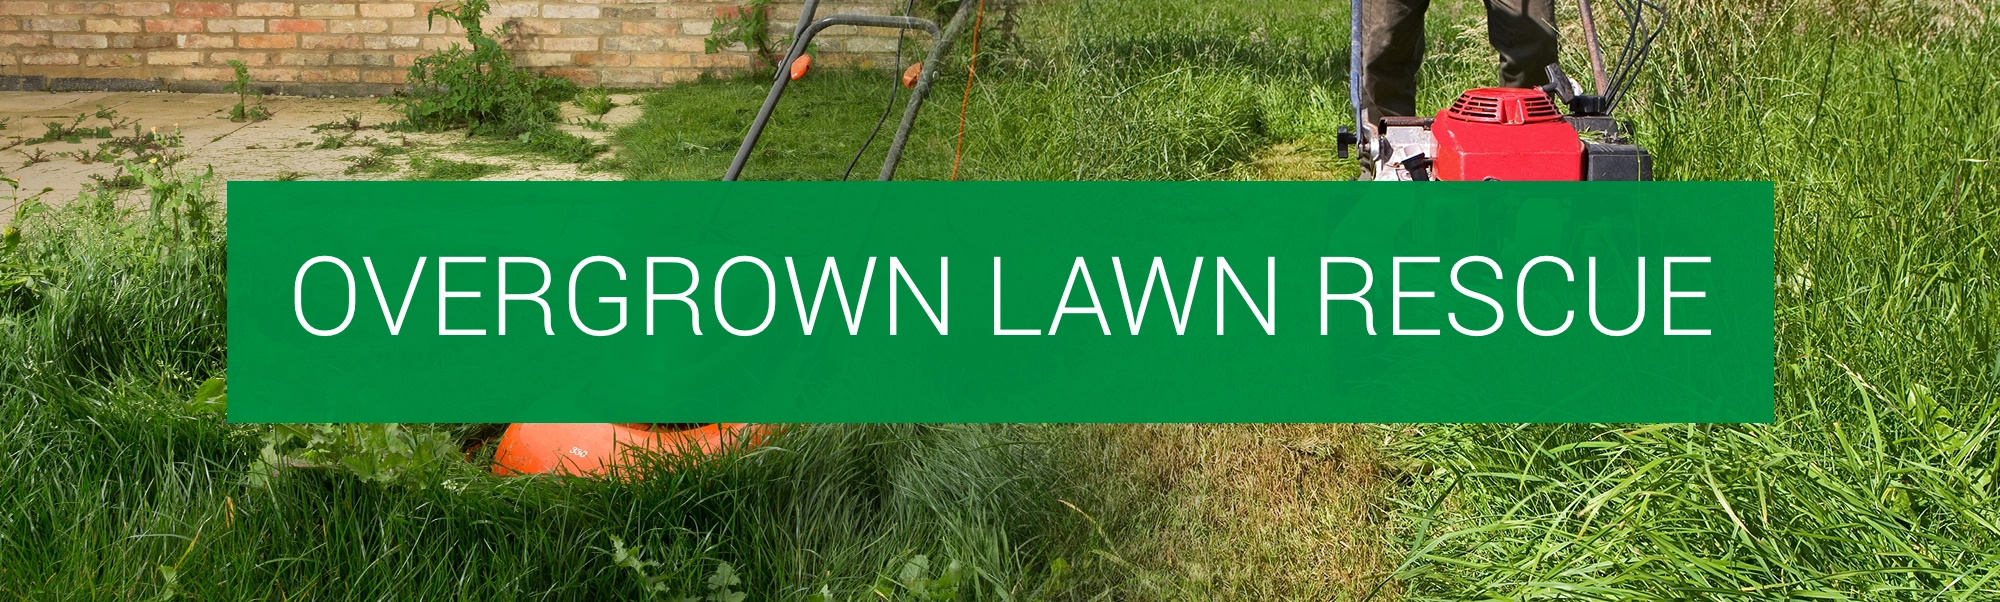 Lawn Care Services in Idaho - Overgrown Lawn Rescue